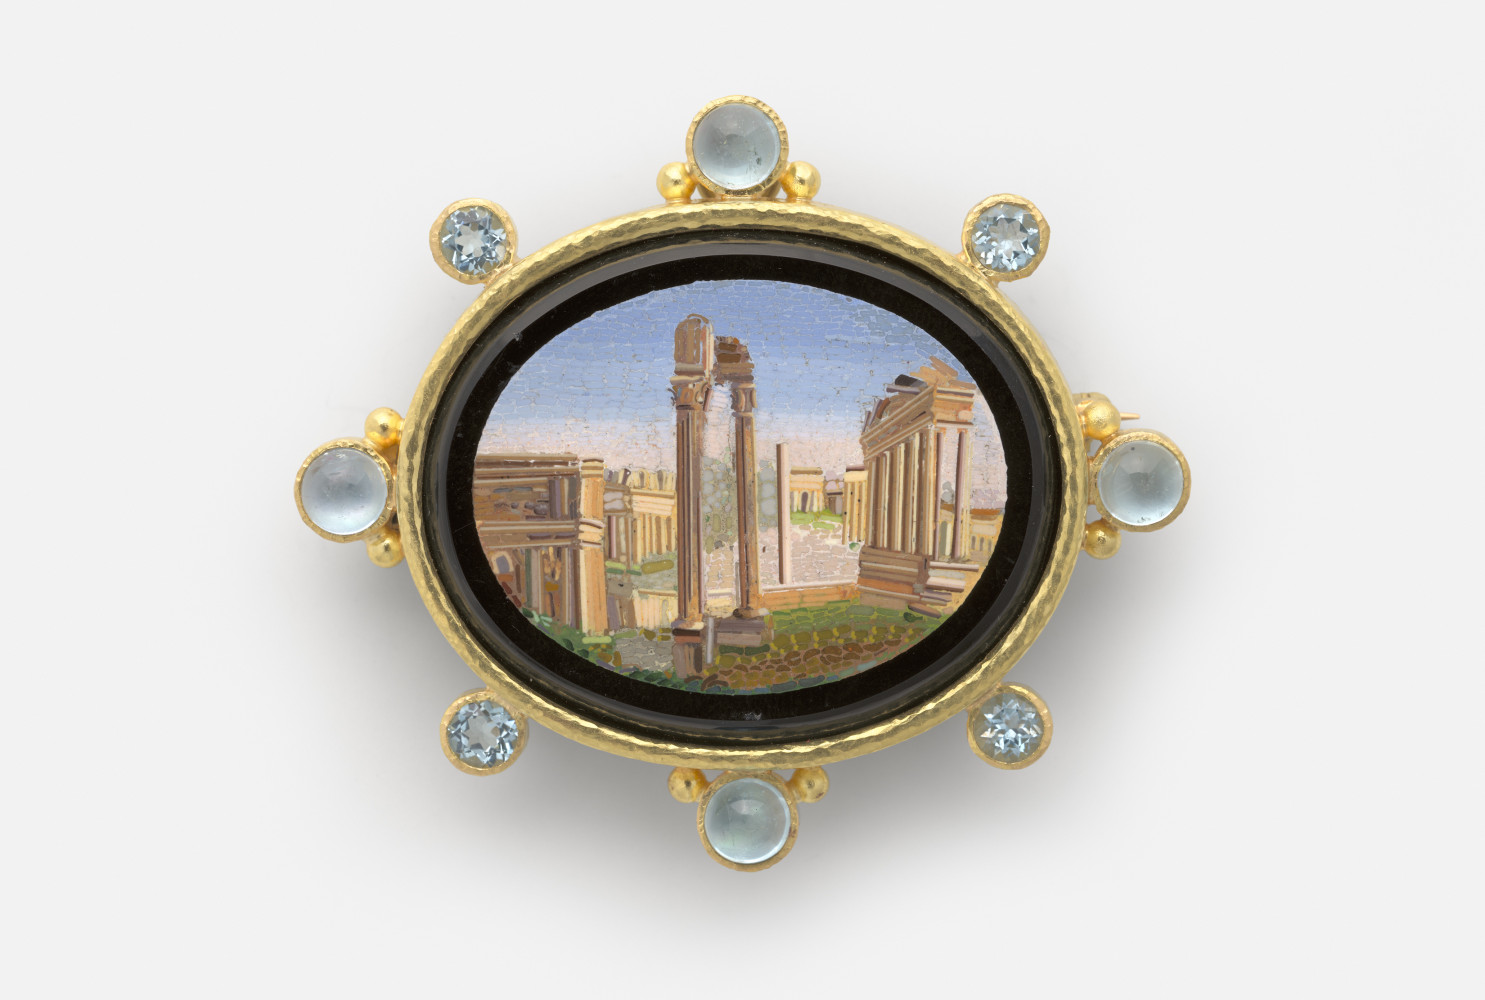 Roman Forum, Rome, 19th century, micromosaic set in gold as a brooch, with alternating 6-mm cabochon aquamarines with side gold dots and 5-mm faceted aquamarines around bezel, 54 x 62 mm. Collection of Elizabeth Locke

Photo: Travis Fullerton, Virginia Museum of Fine Arts
